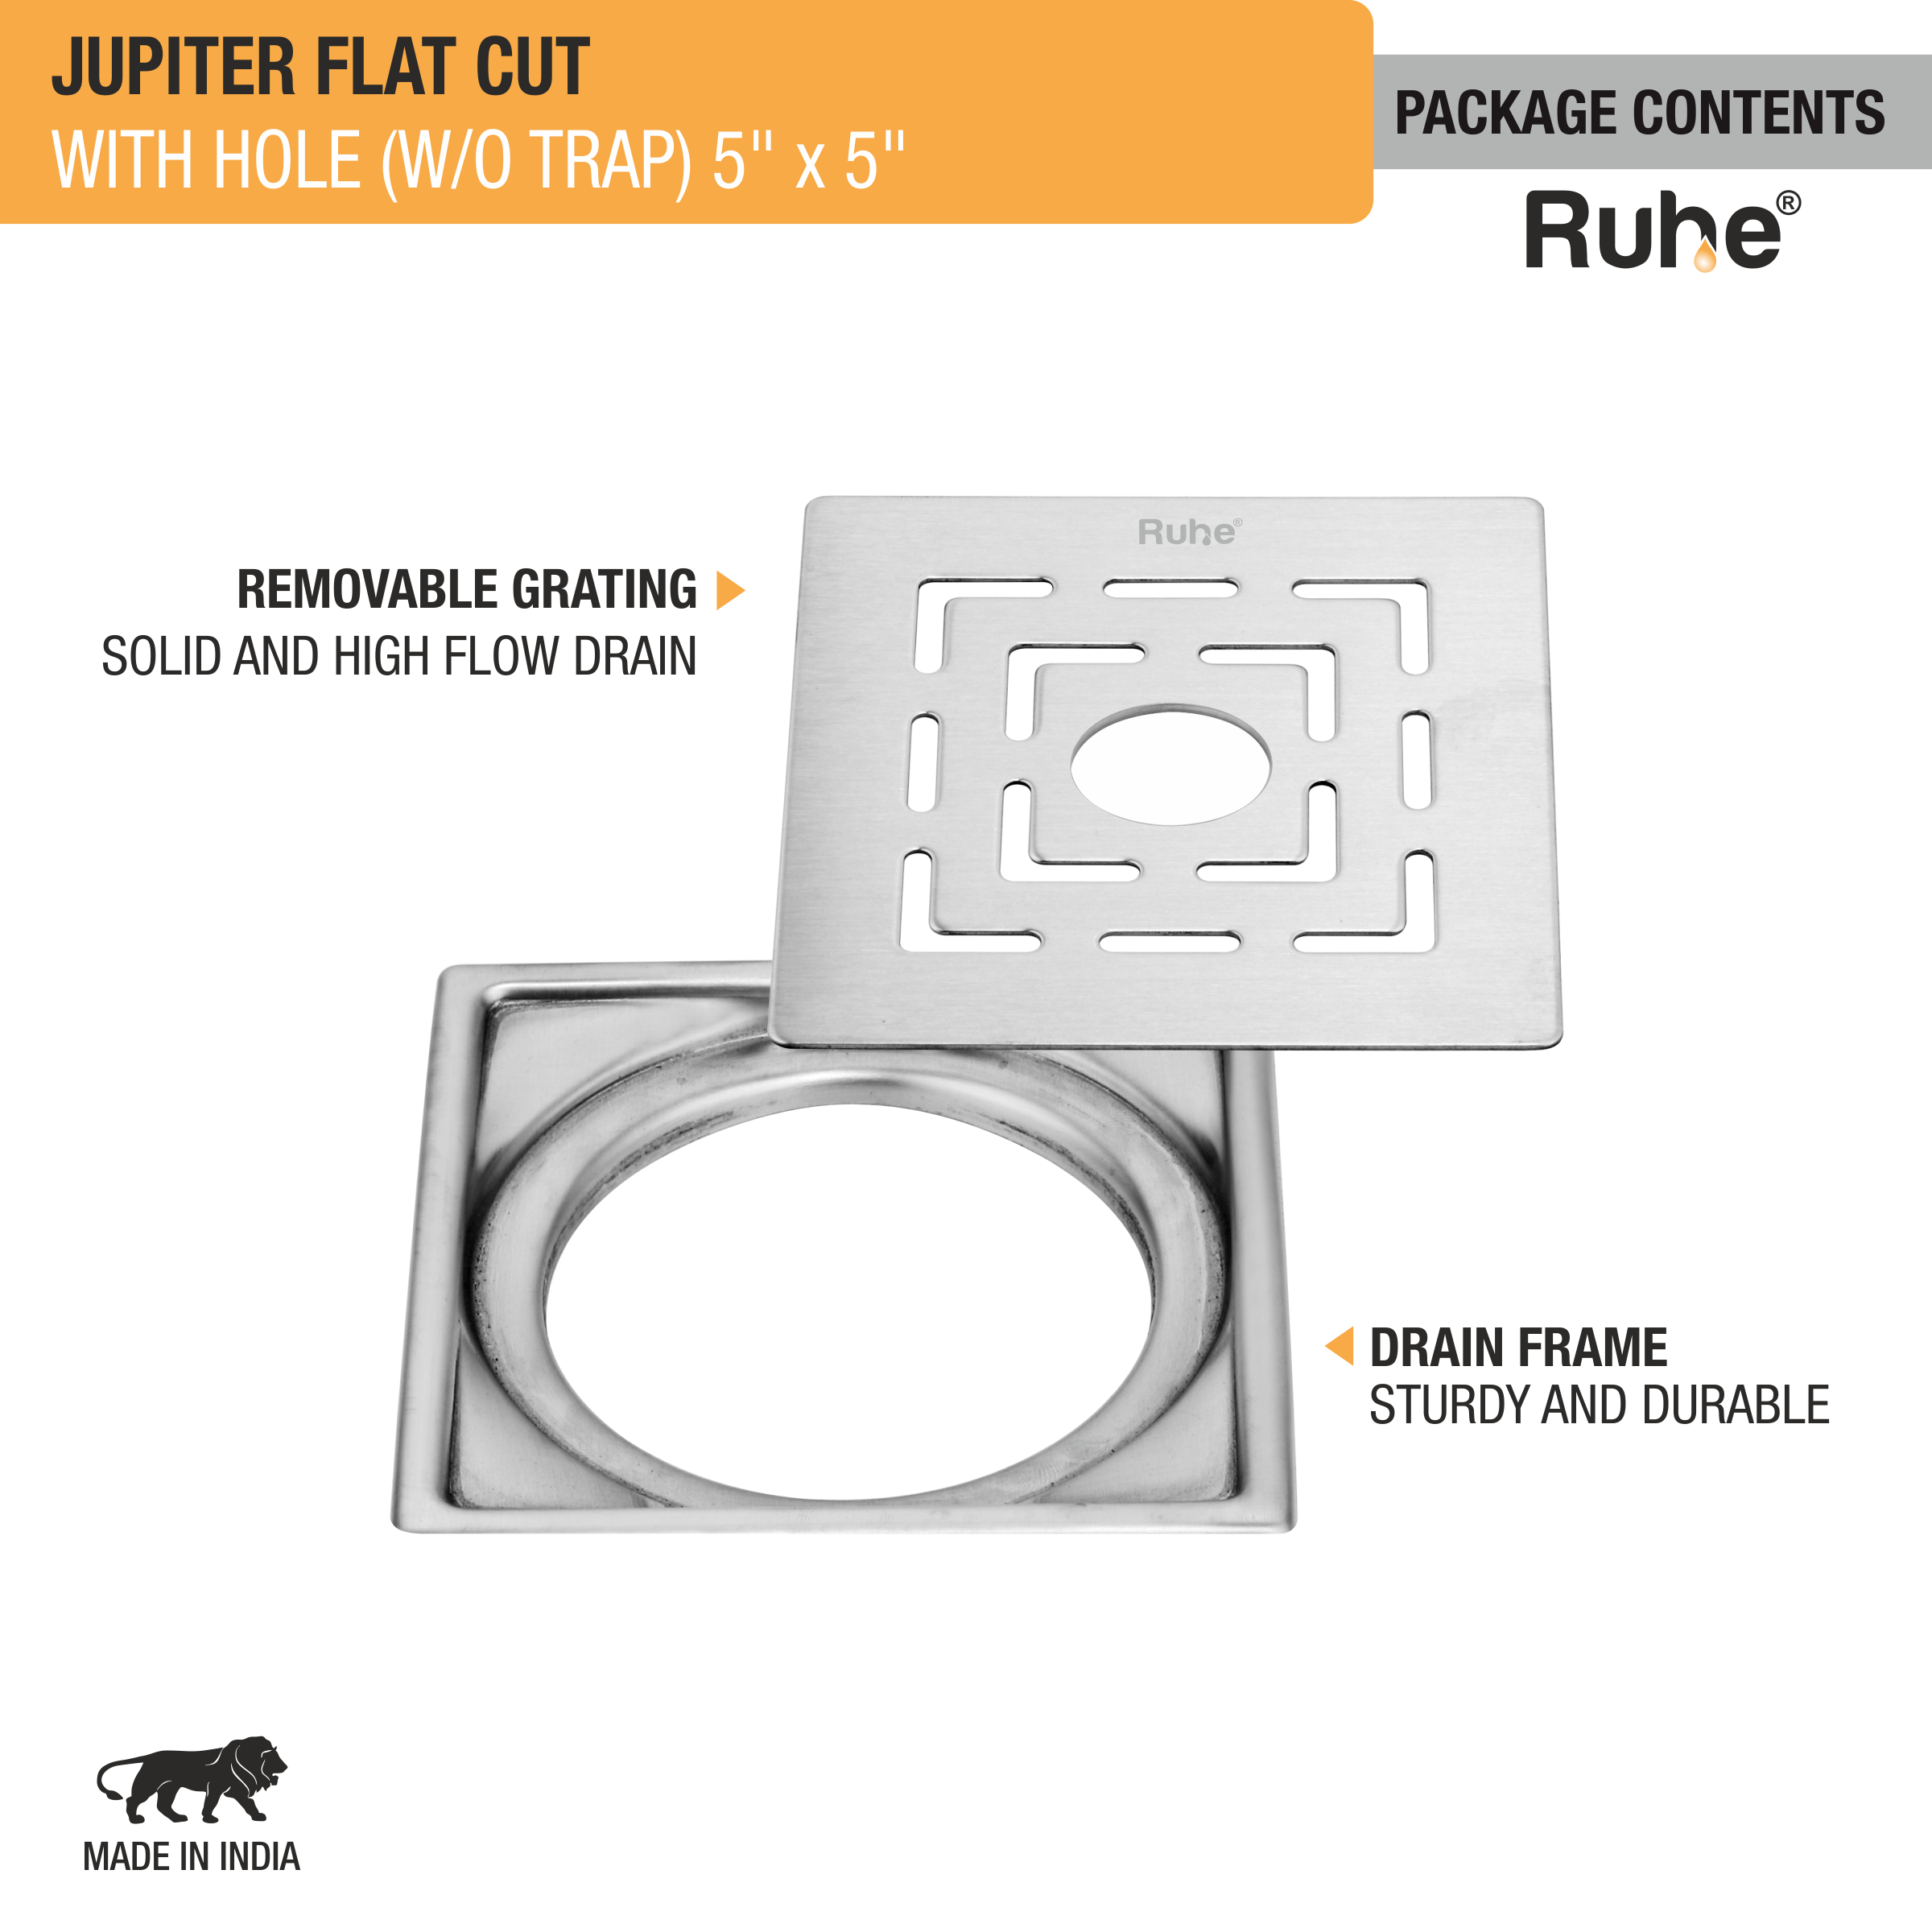 Jupiter Square Premium Flat Cut Floor Drain (5 x 5 Inches) with Hole package content